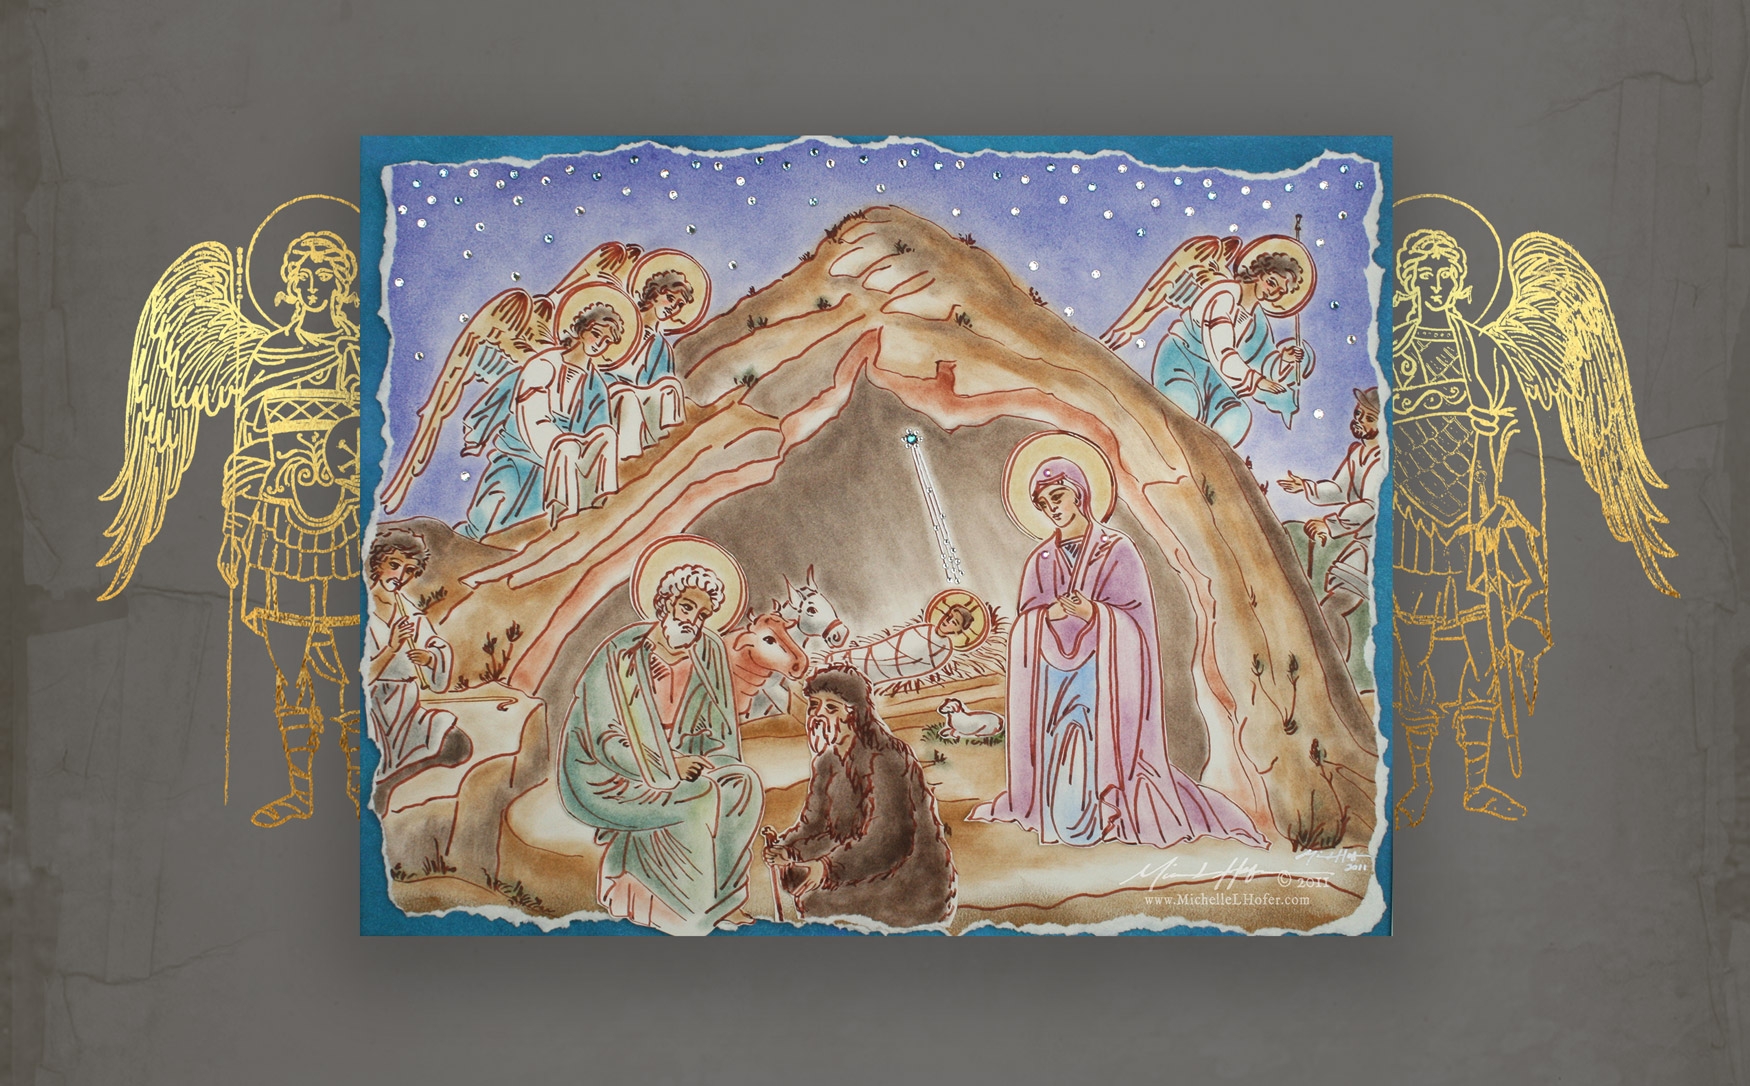 The Nativity of Christ, 2011 by Michelle L Hofer